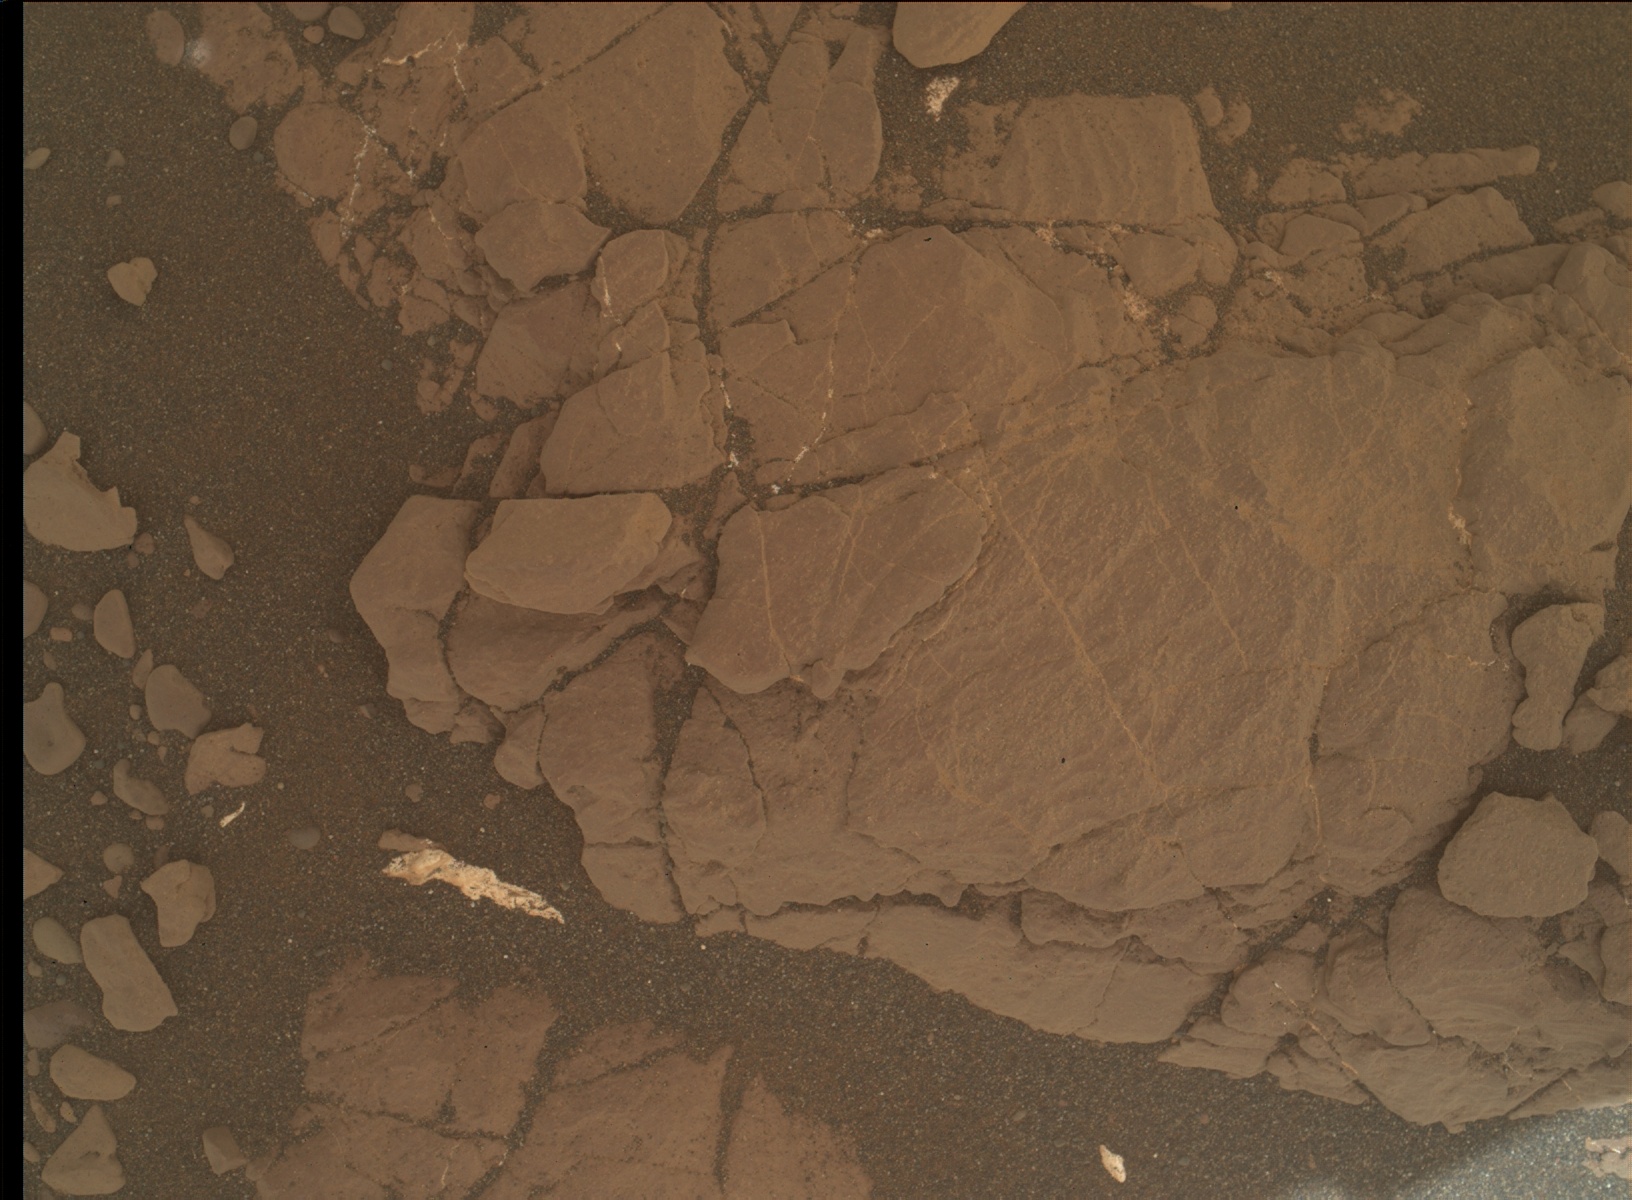 Nasa's Mars rover Curiosity acquired this image using its Mars Hand Lens Imager (MAHLI) on Sol 2365